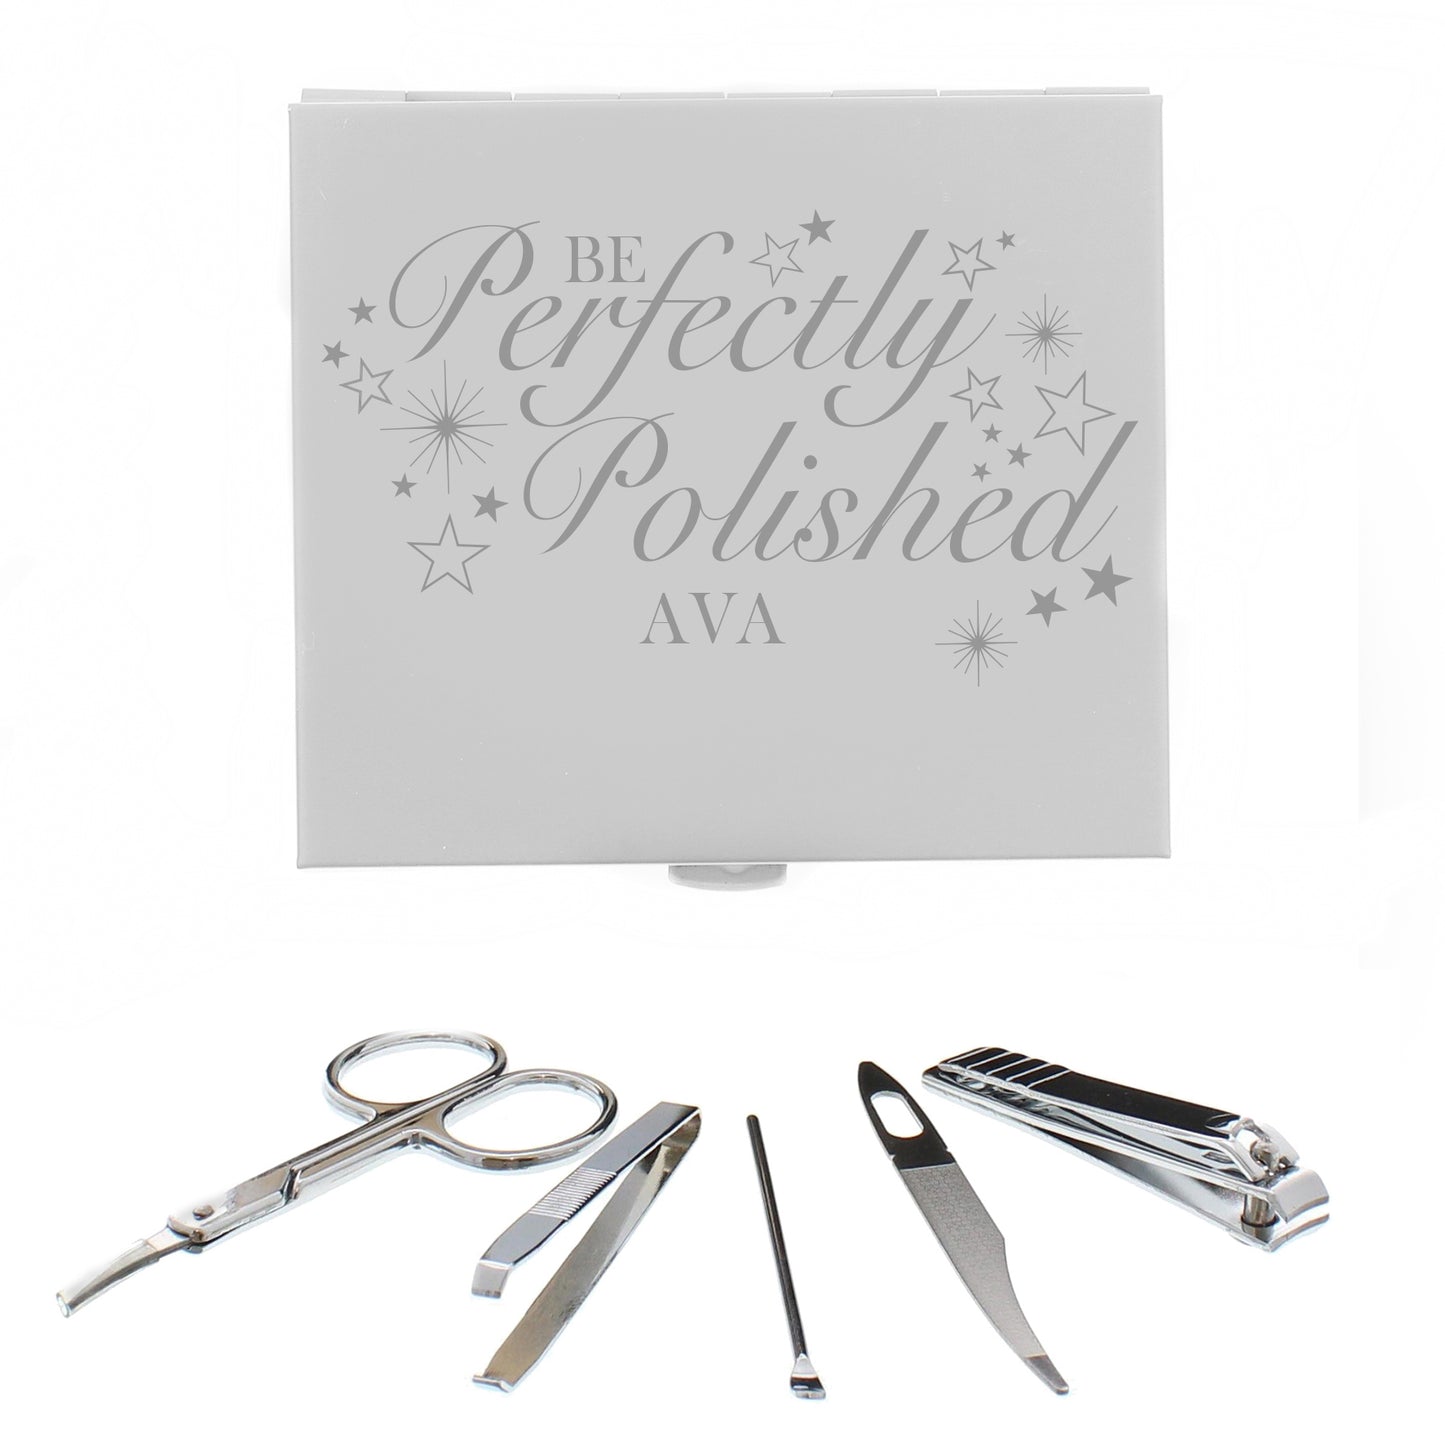 Manicure set engraved with "Be Perfectly Polished" and personalised name. Contents are nail scissors, tweezers, cuticle buffer, nail file, nail clippers